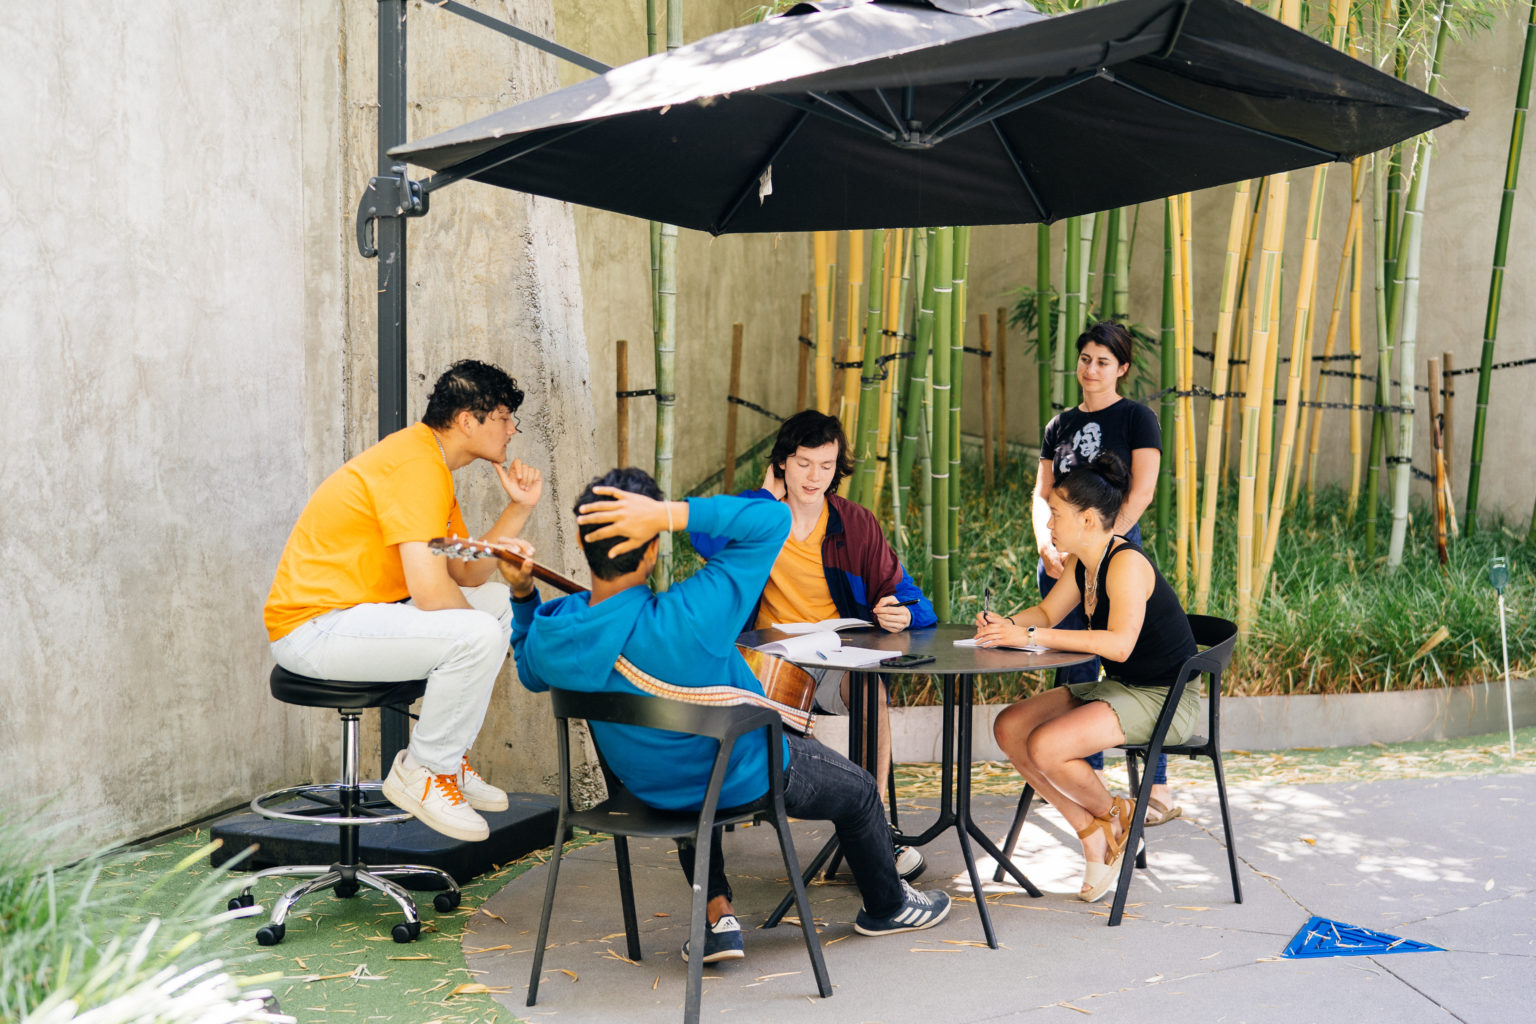 Students and instructor sitting around a table outside